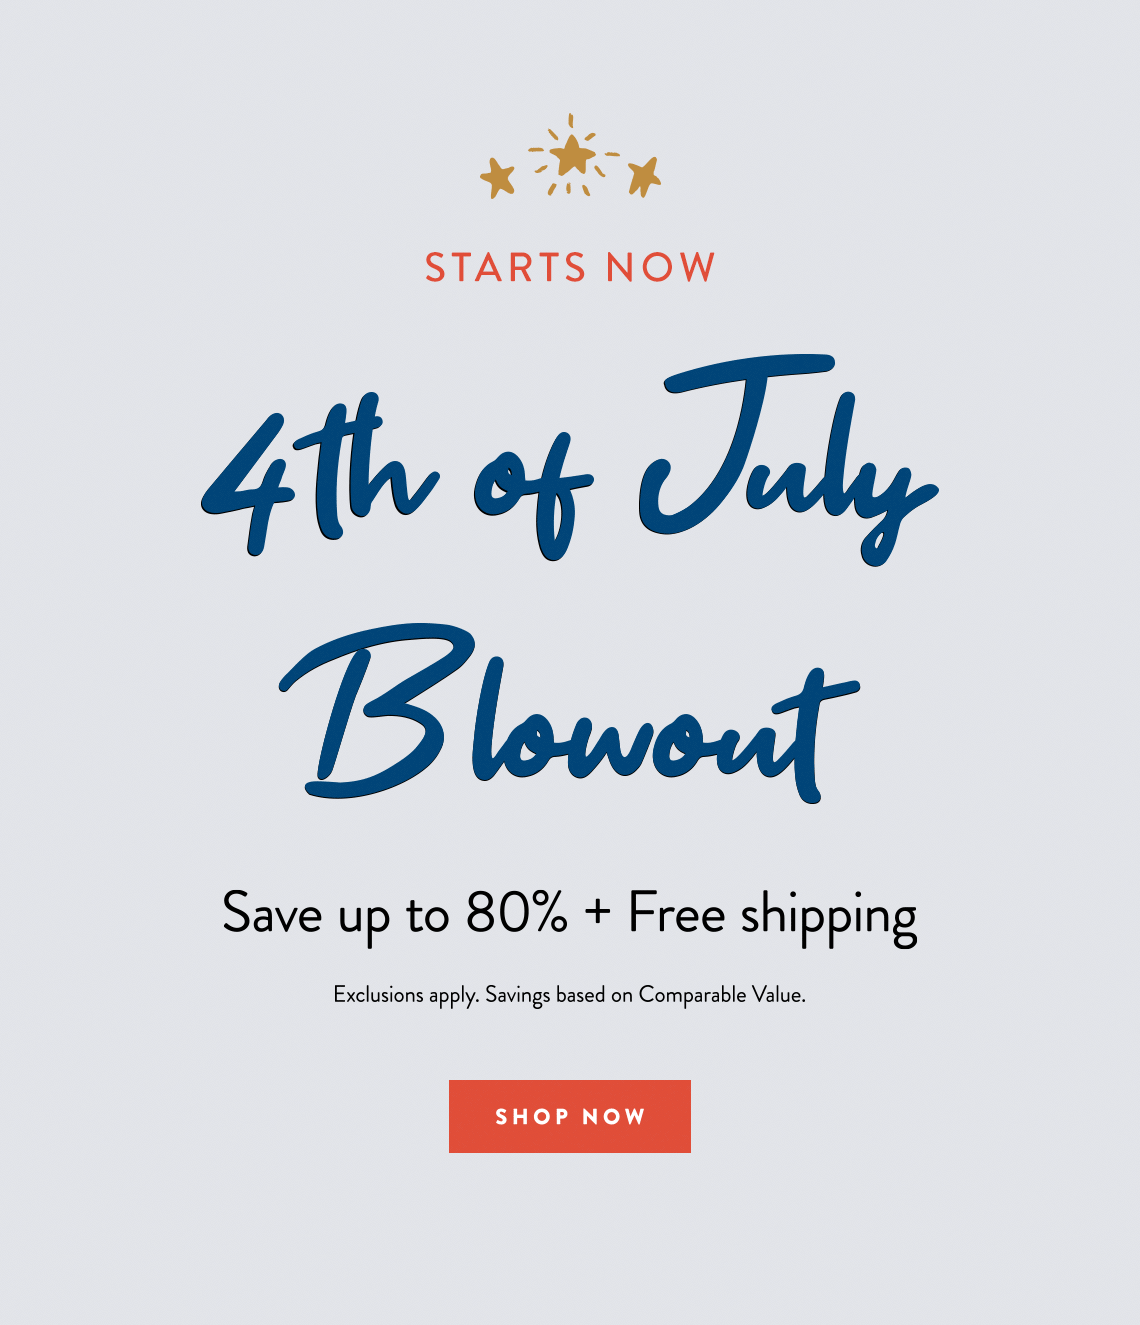 4th of July Blowout - Starts Now!